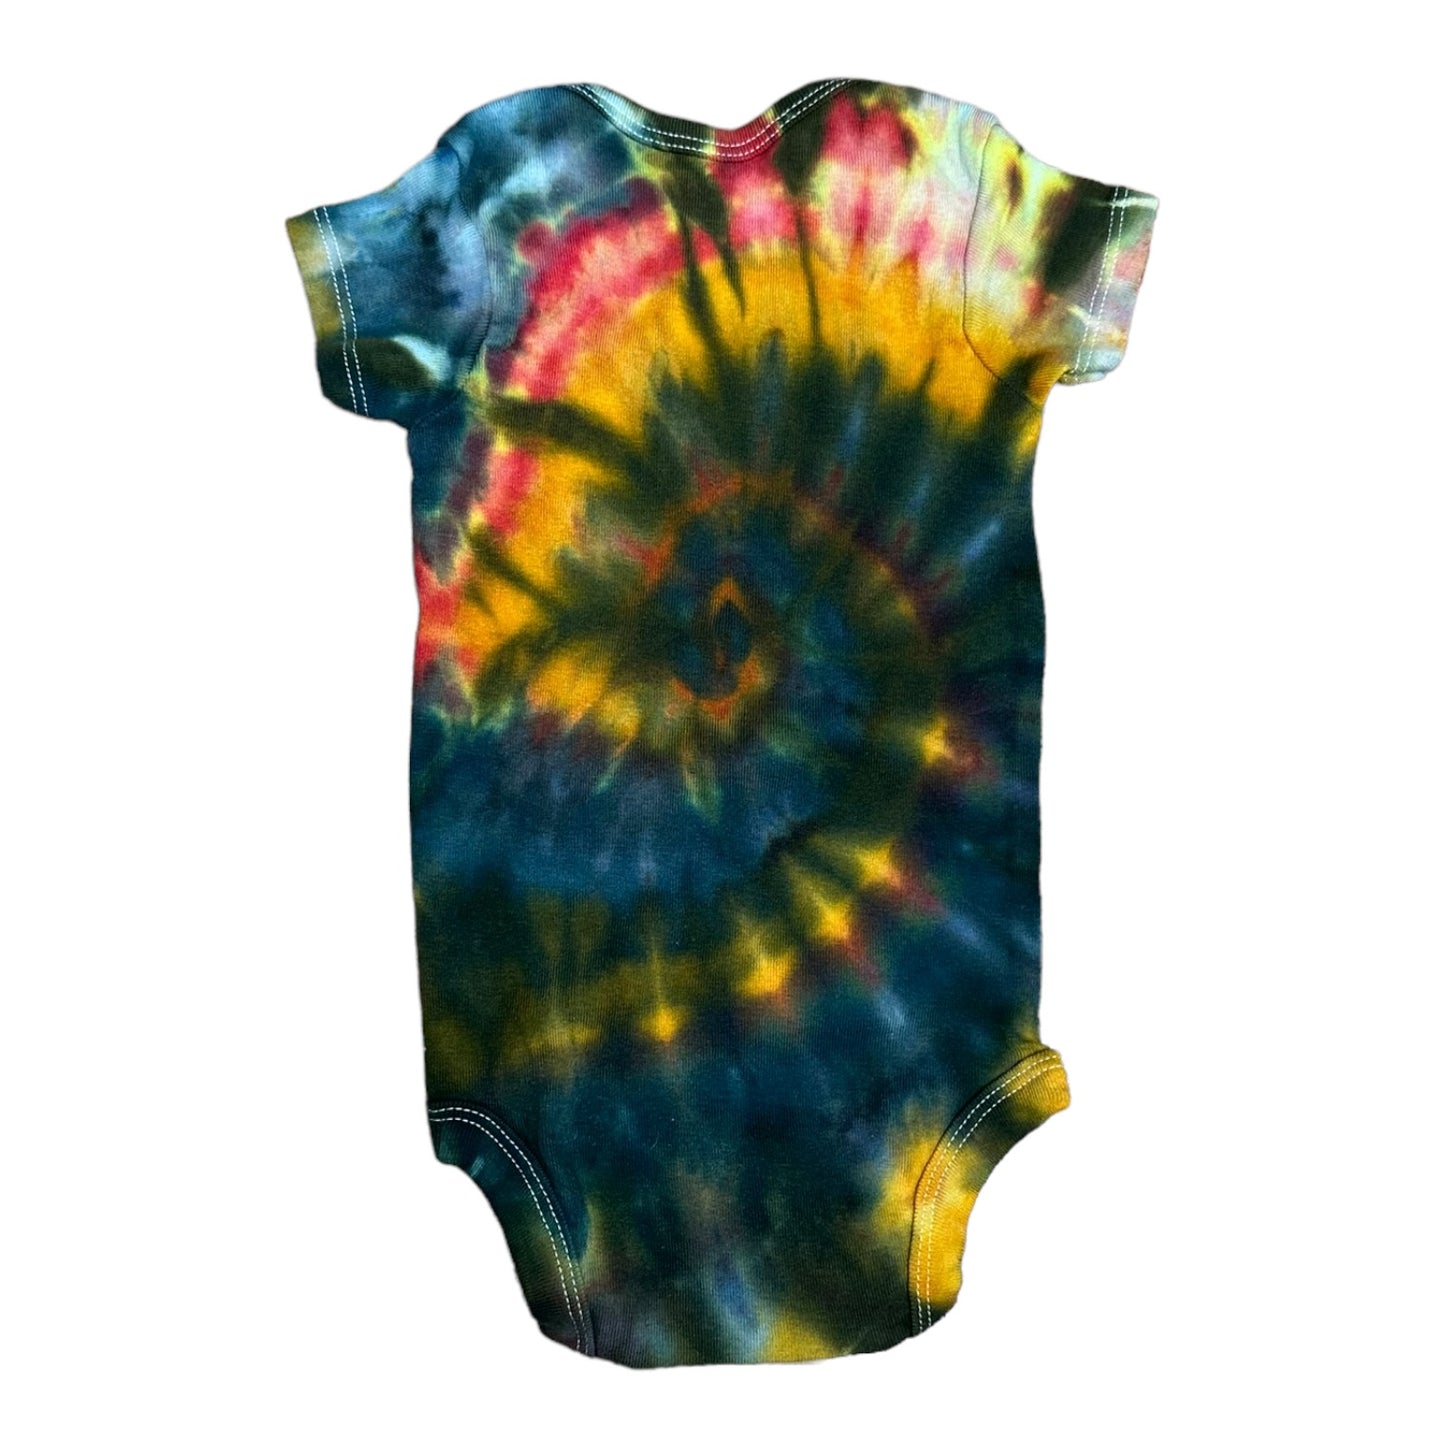 Infant 3-6 Months Green Yellow Red and Blue Spiral Ice Dye Tie Dye Onesie